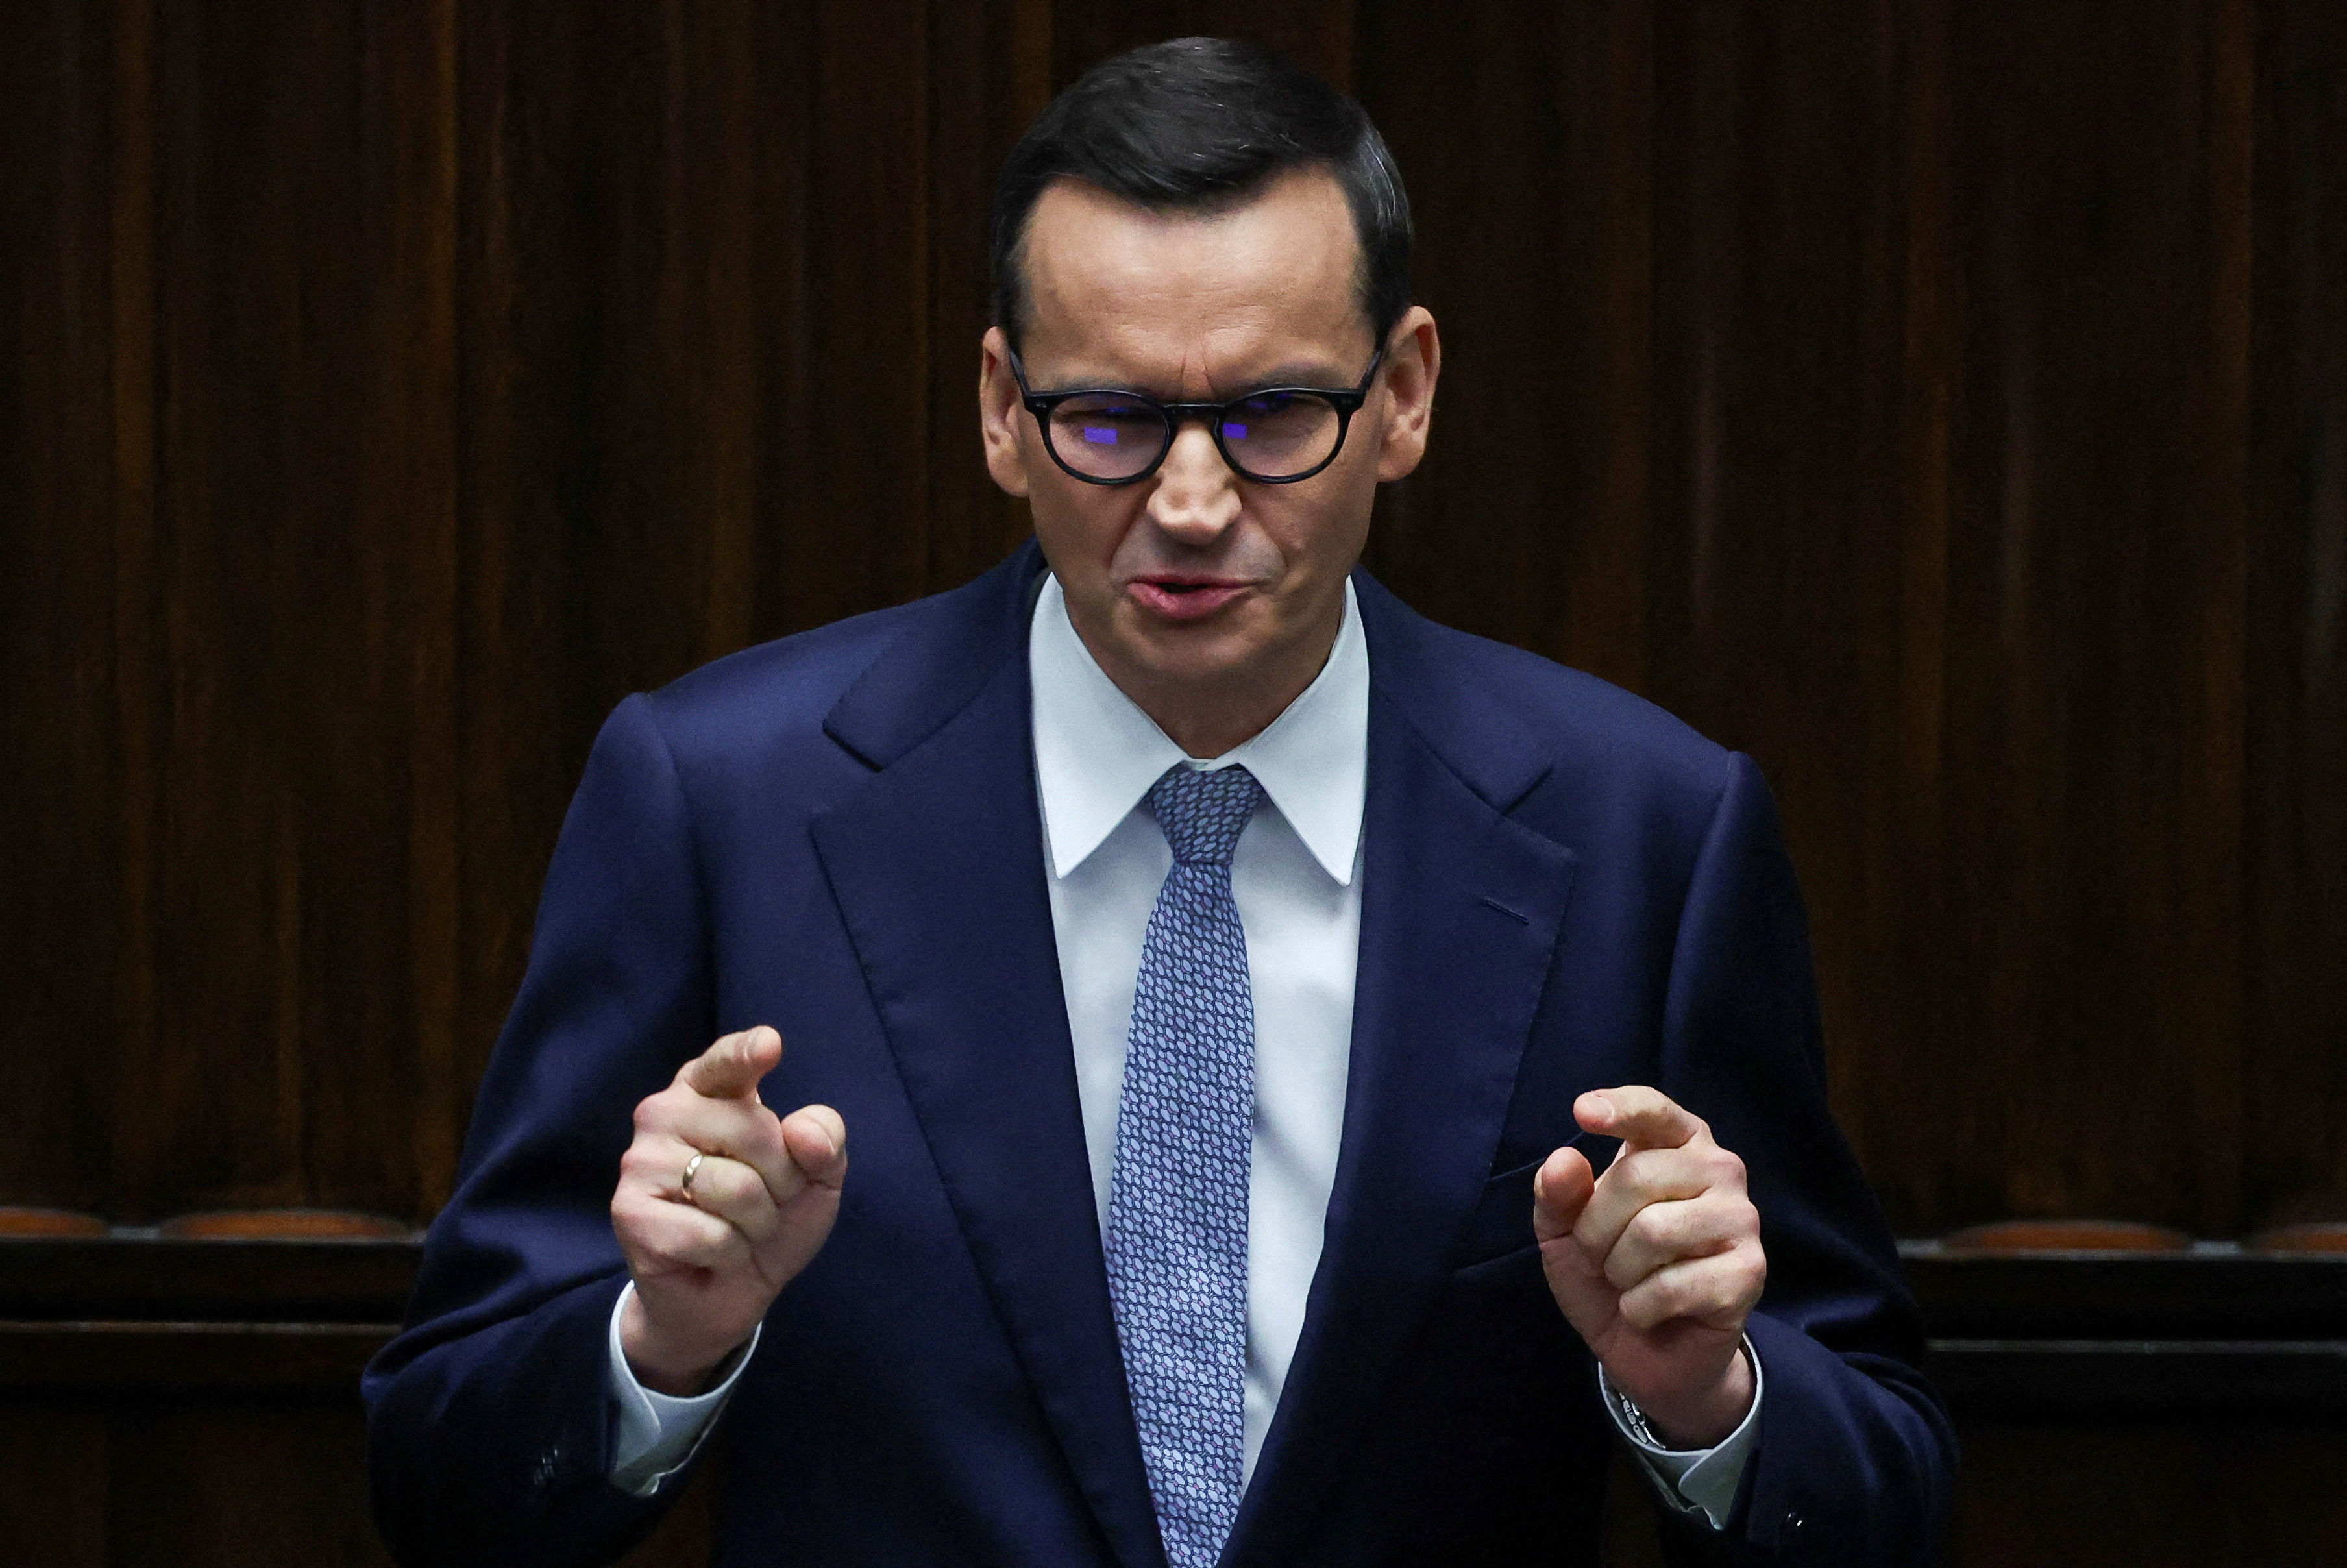 Polish president to meet party leaders for talks on forming government, Poland